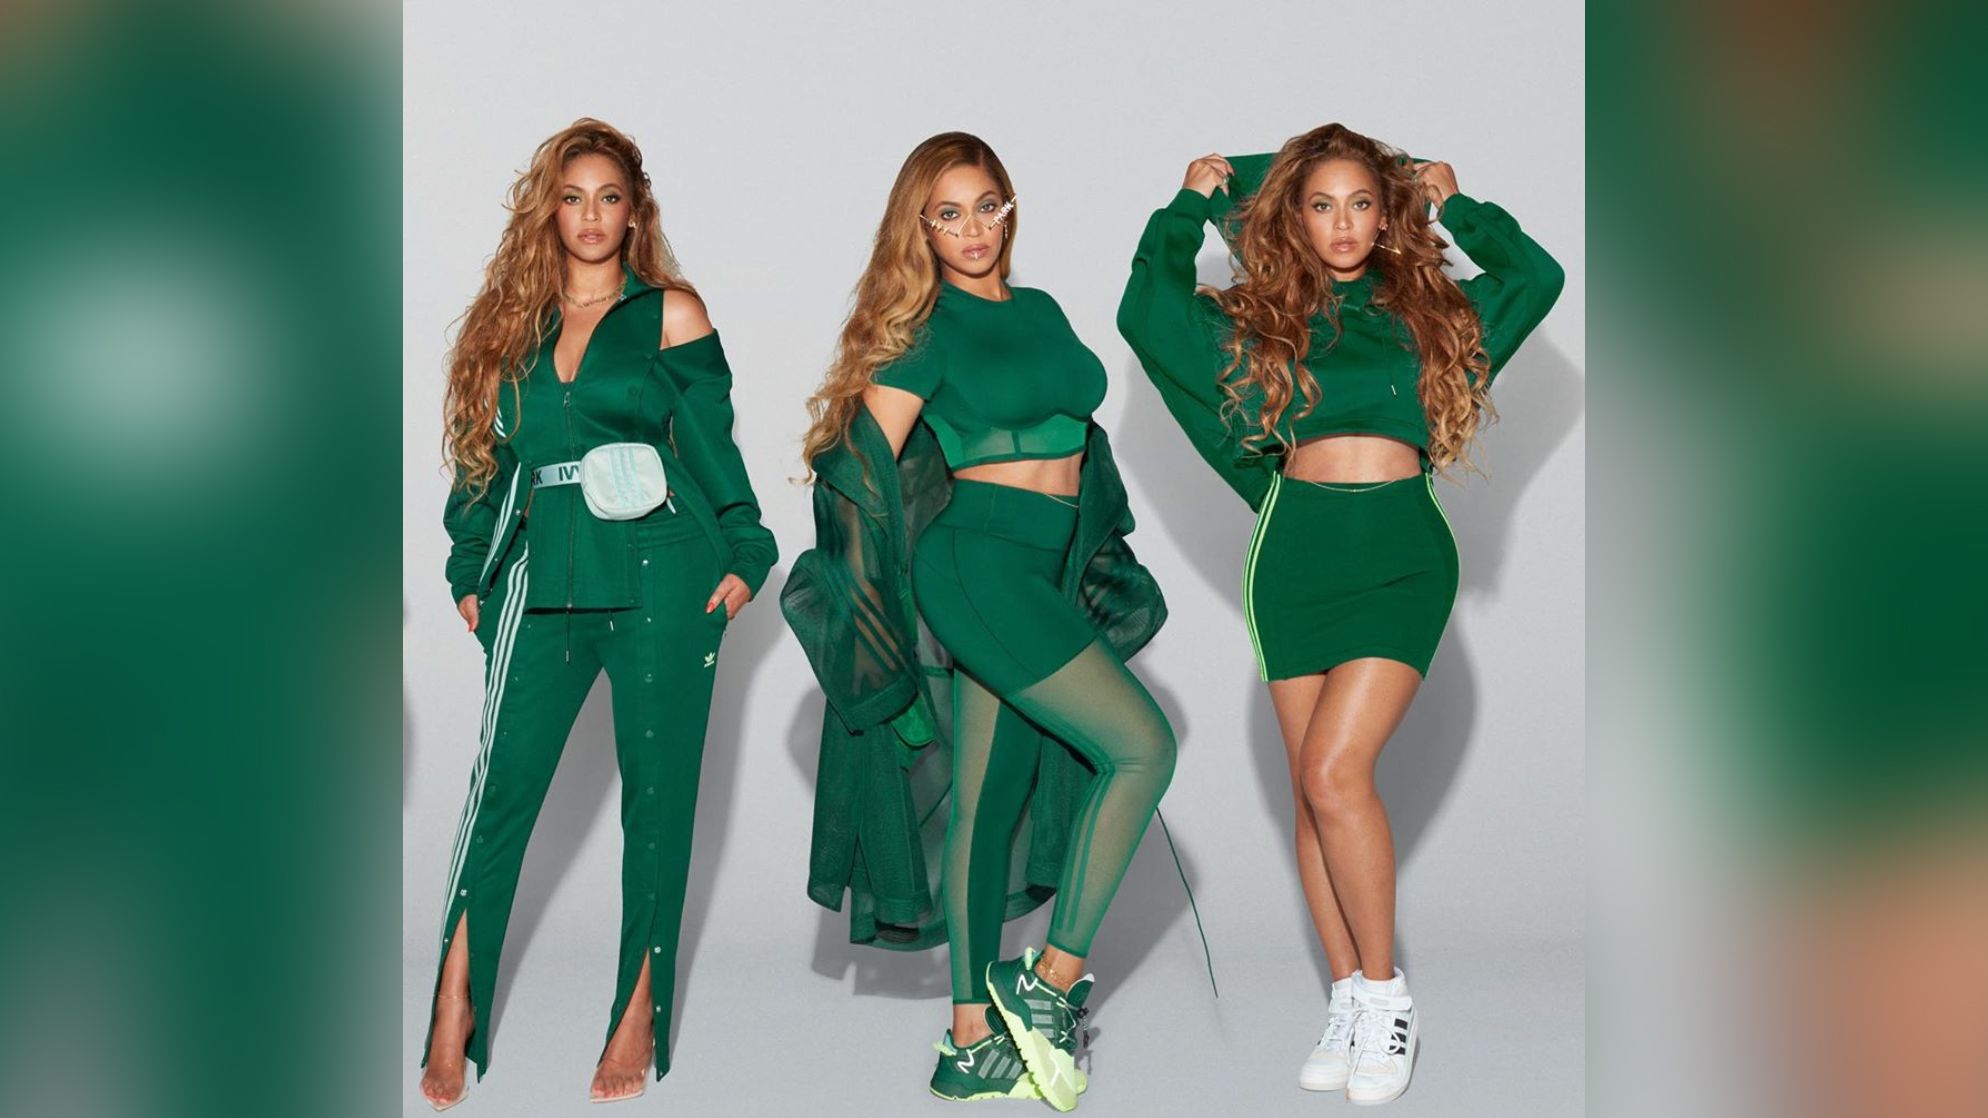 Beyoncé's Ivy Park clothing line hasn't been a hot seller. Now she and  Adidas are parting ways